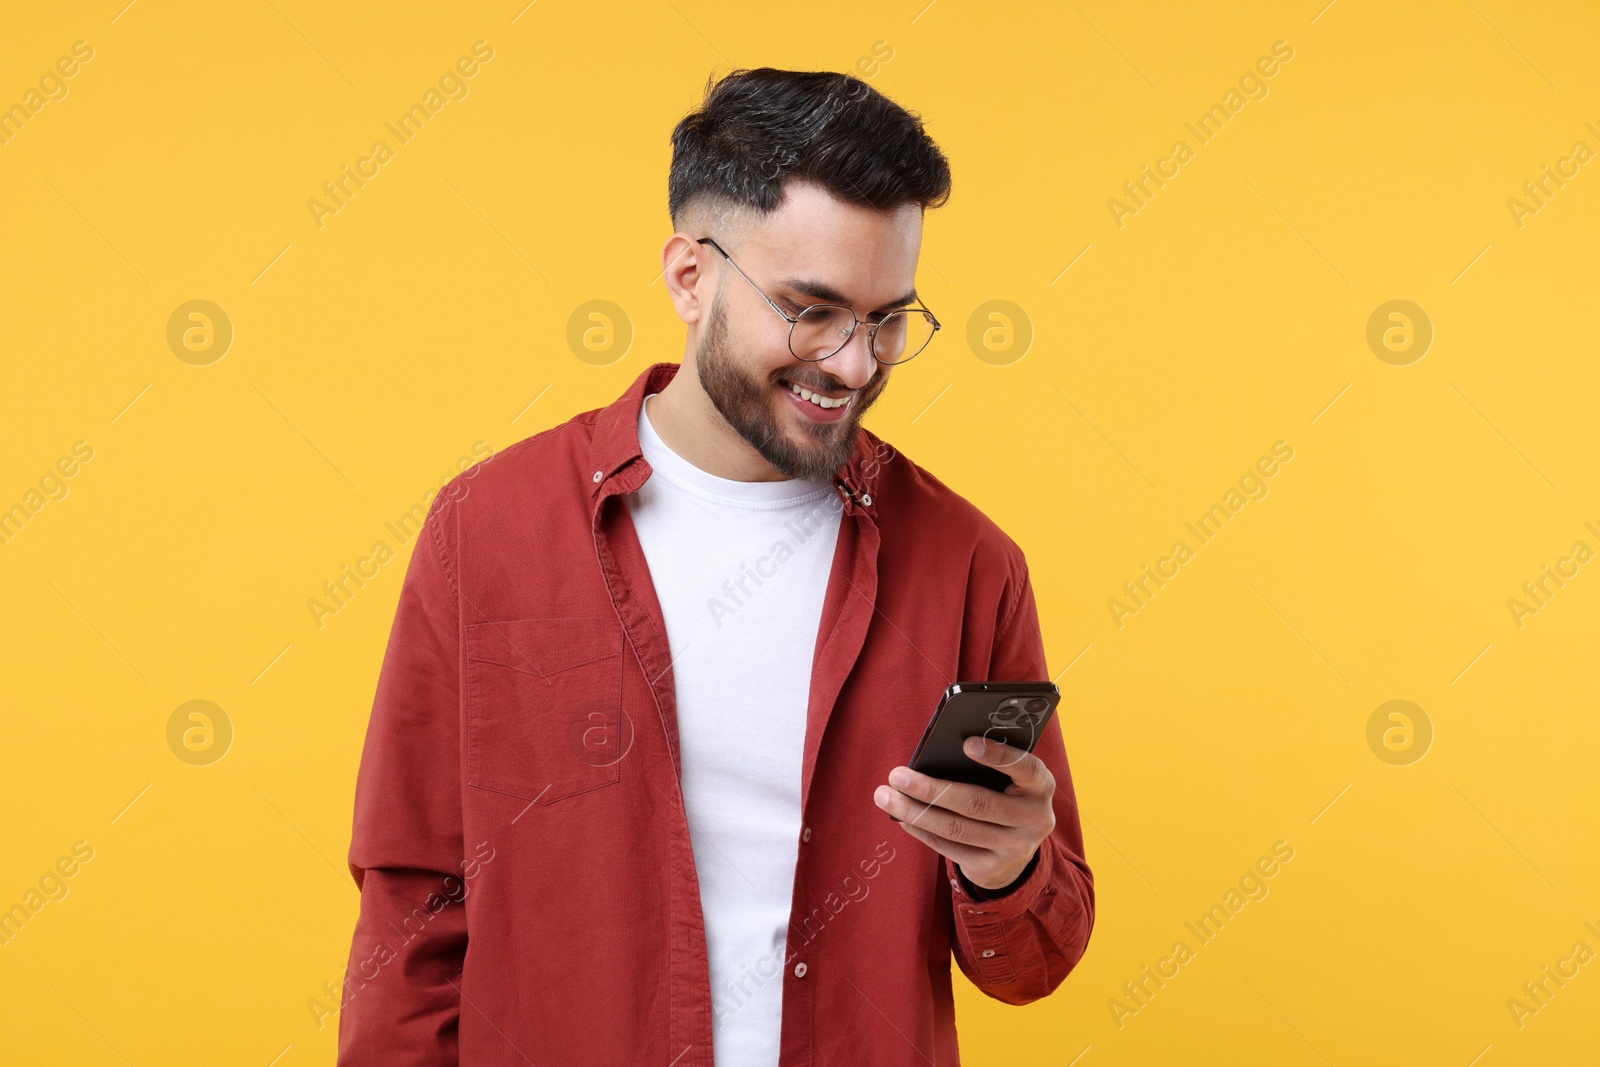 Photo of Happy young man using smartphone on yellow background